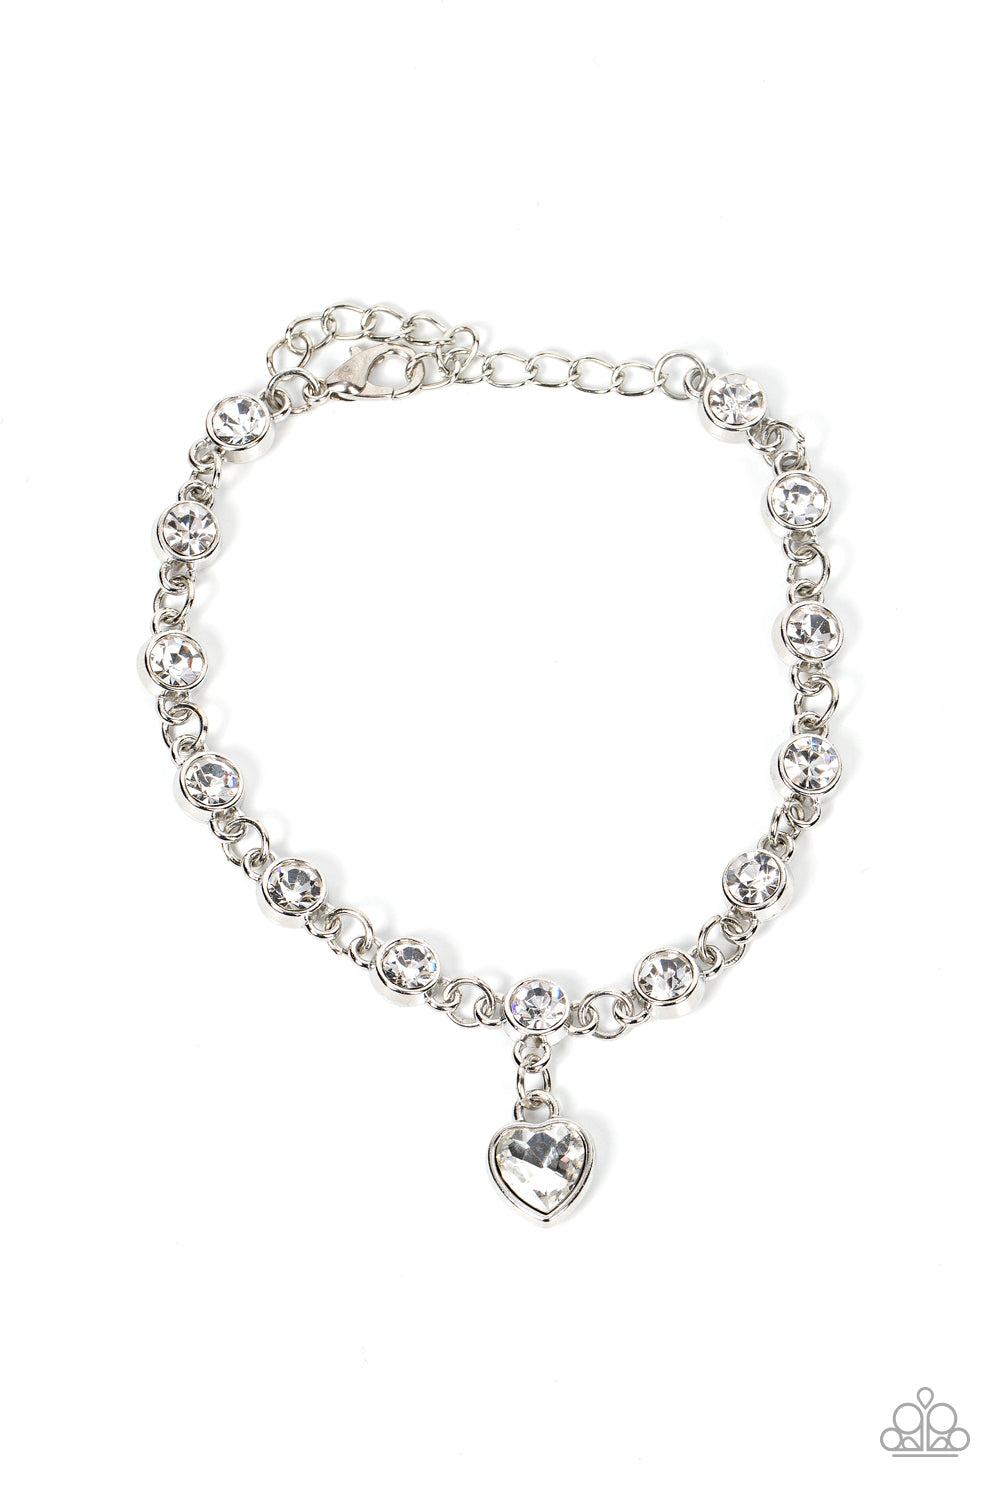 True Love Trinket - White Complete Set ***COMING SOON*** - Bling With Crystal